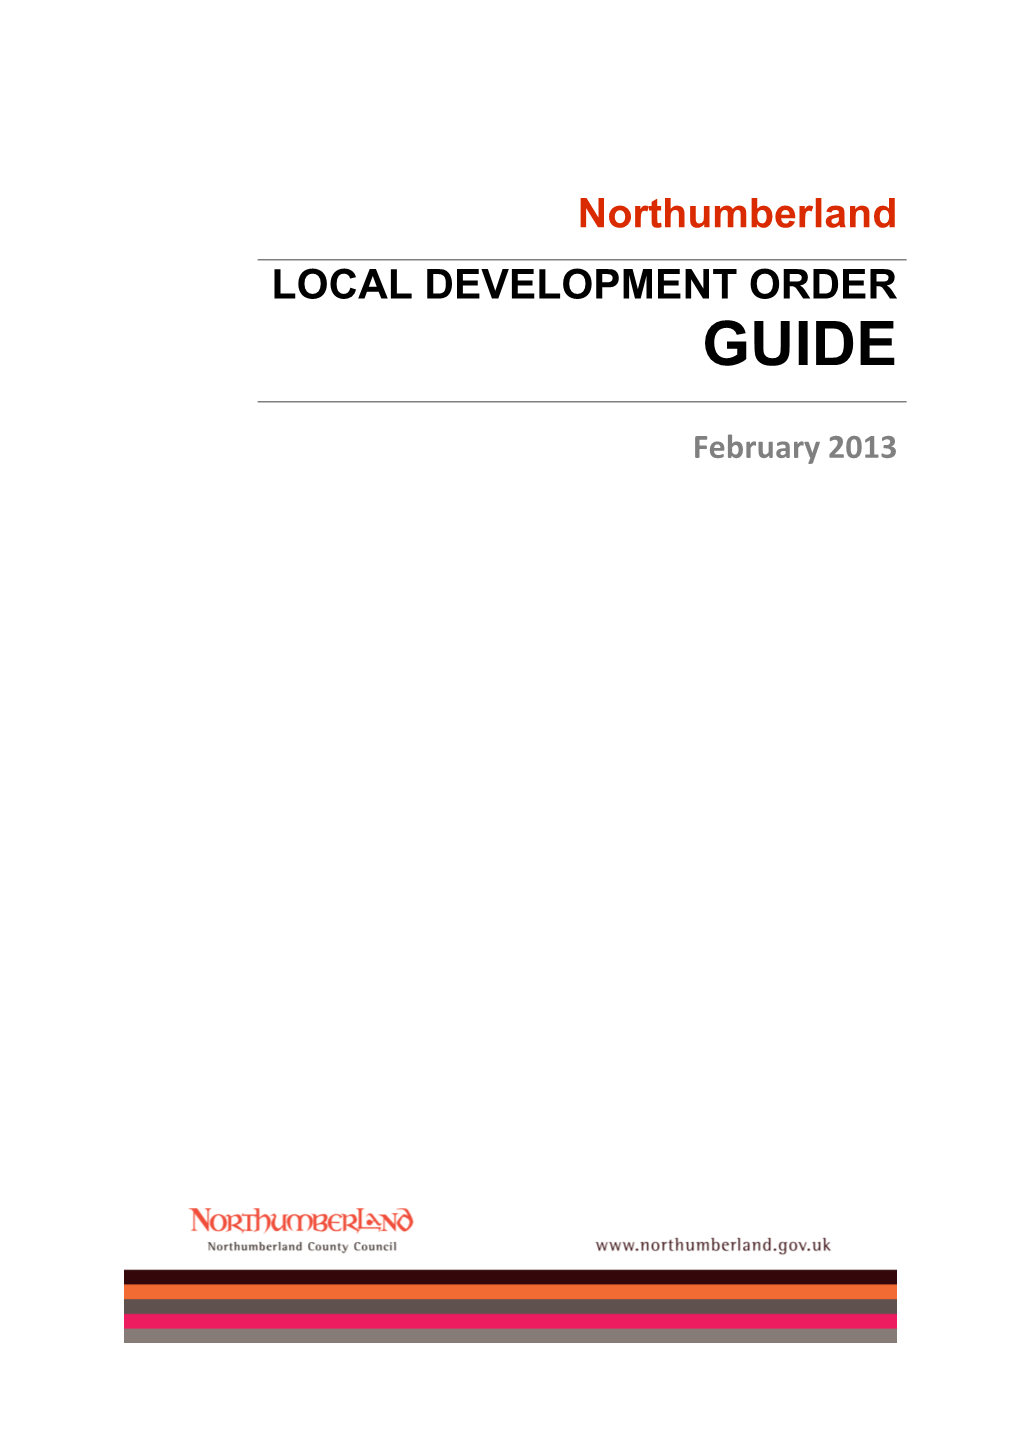 Northumberland Local Development Order Guide